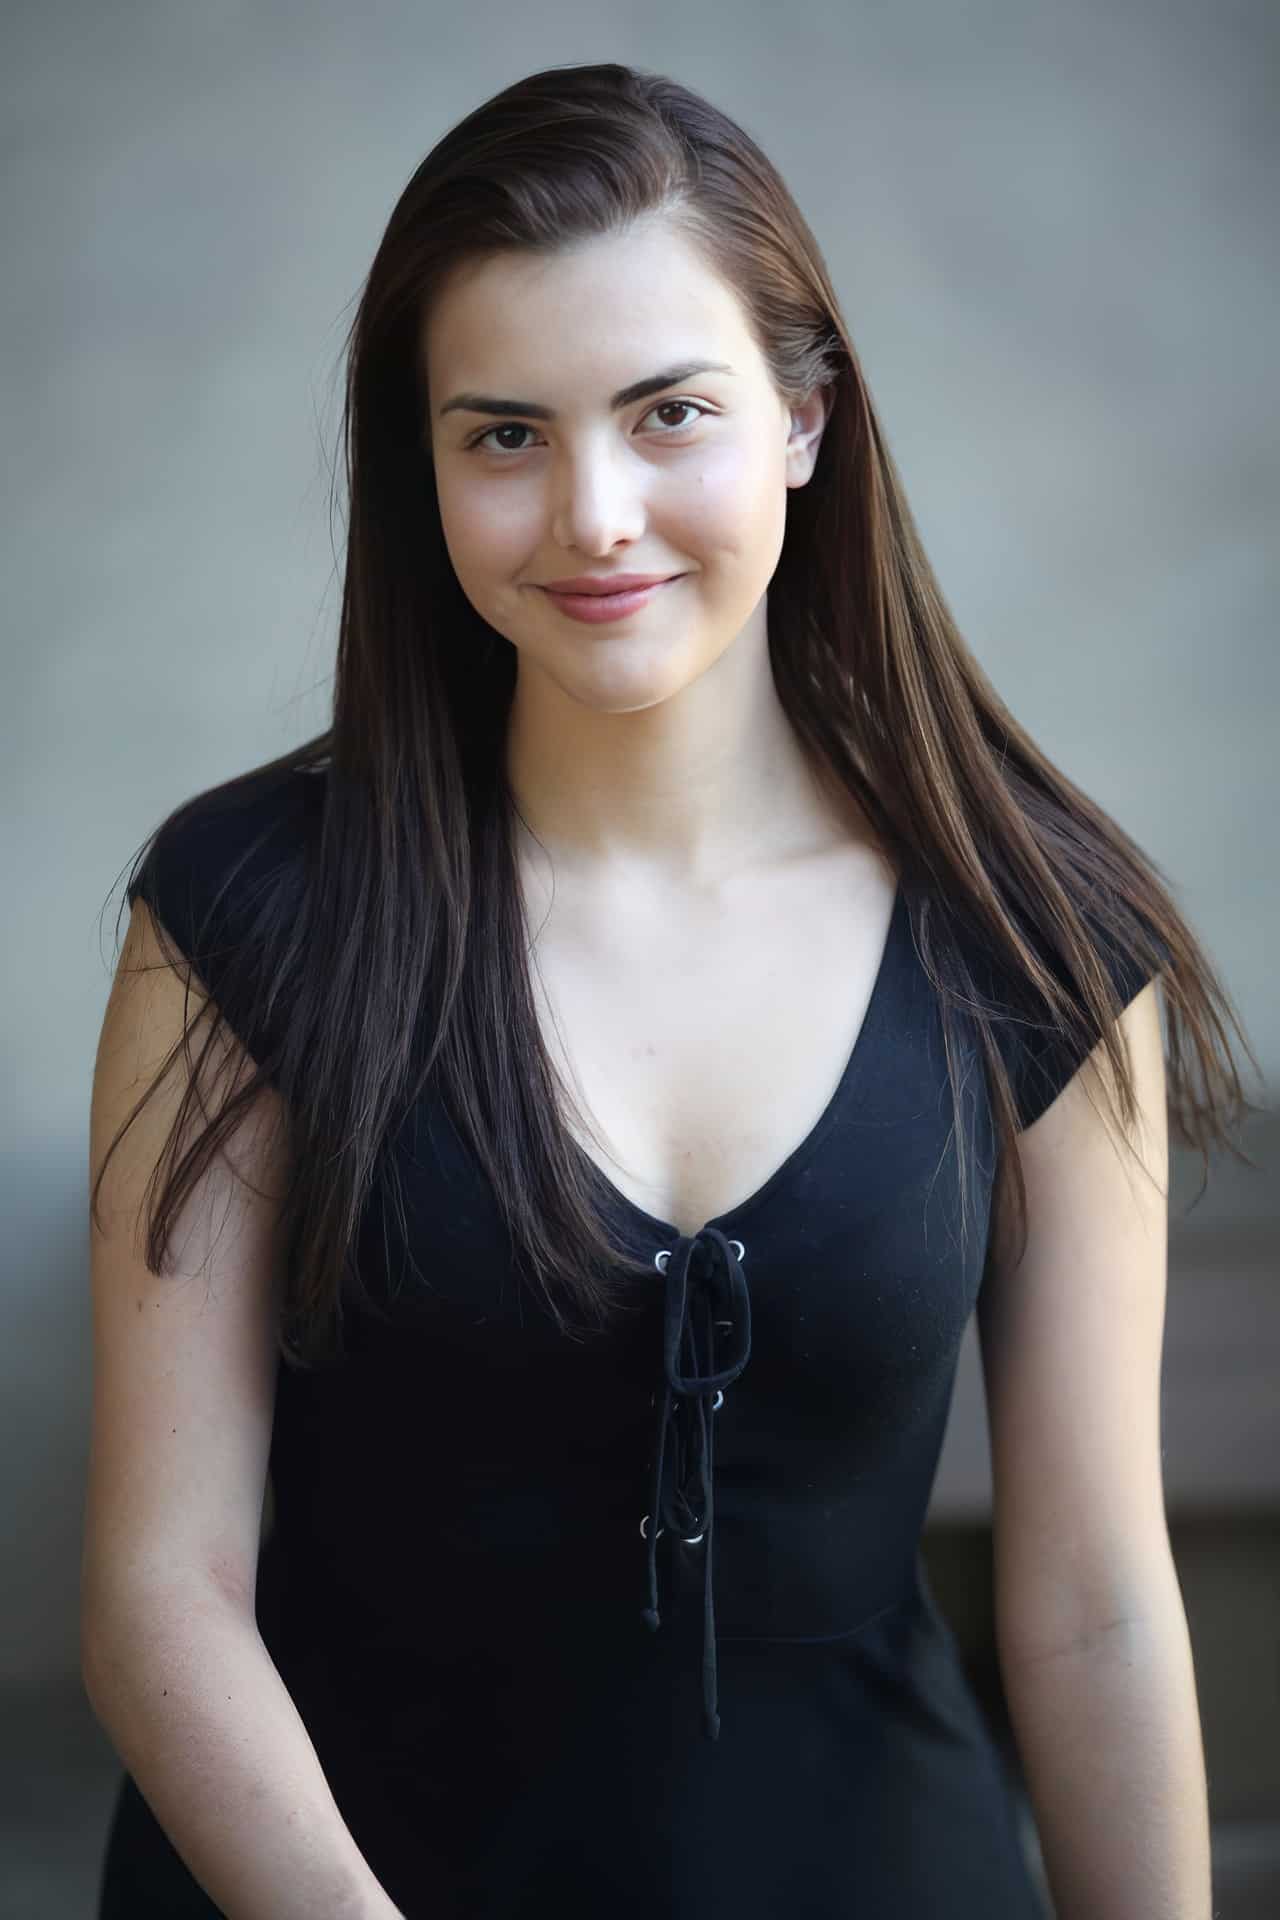 Alexandra Botez on X: Starting today I have 30 days to beat my ATH blitz  rating on chess dot com or I have to bleach my eyebrows for a week. Need to